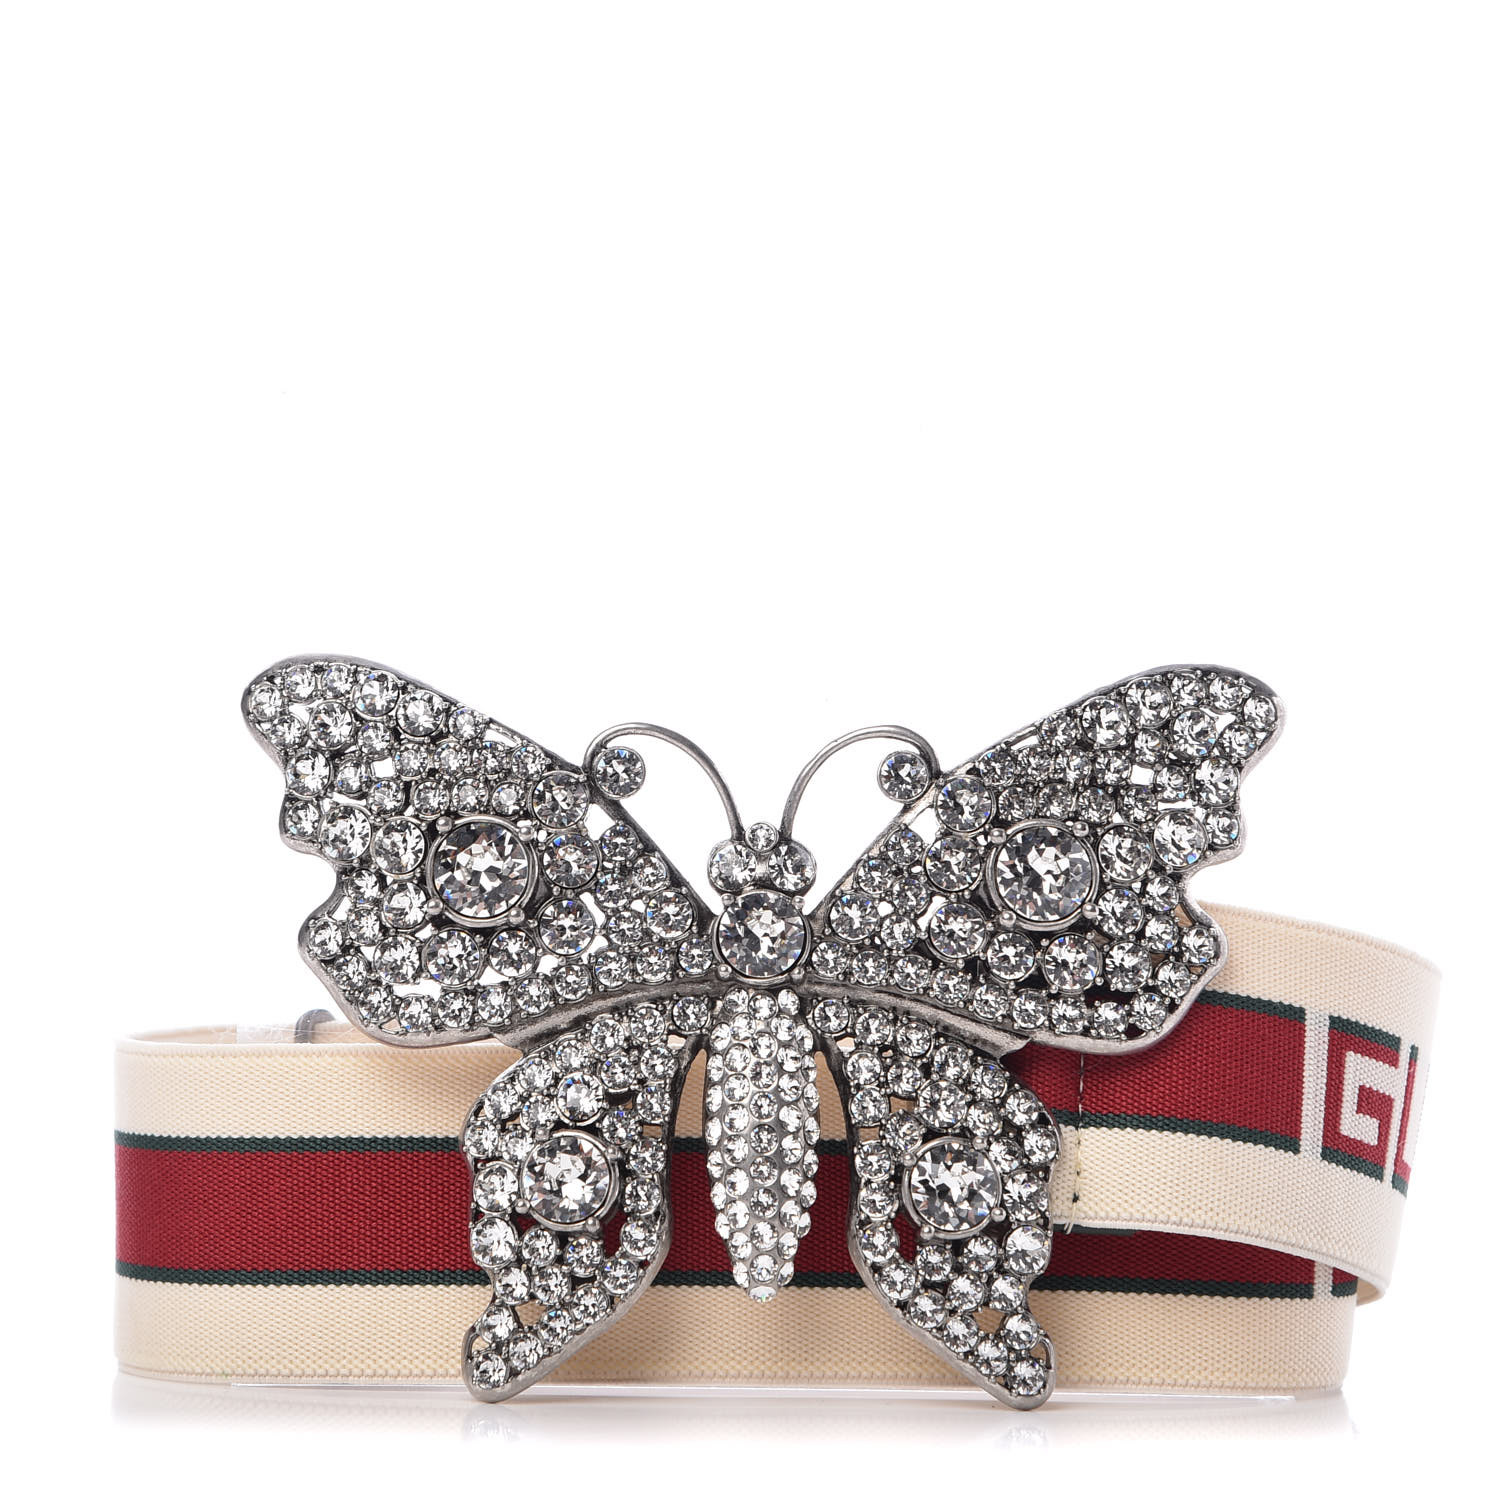 GUCCI Jacquard Crystal Butterfly Belt 80 32 White 360683